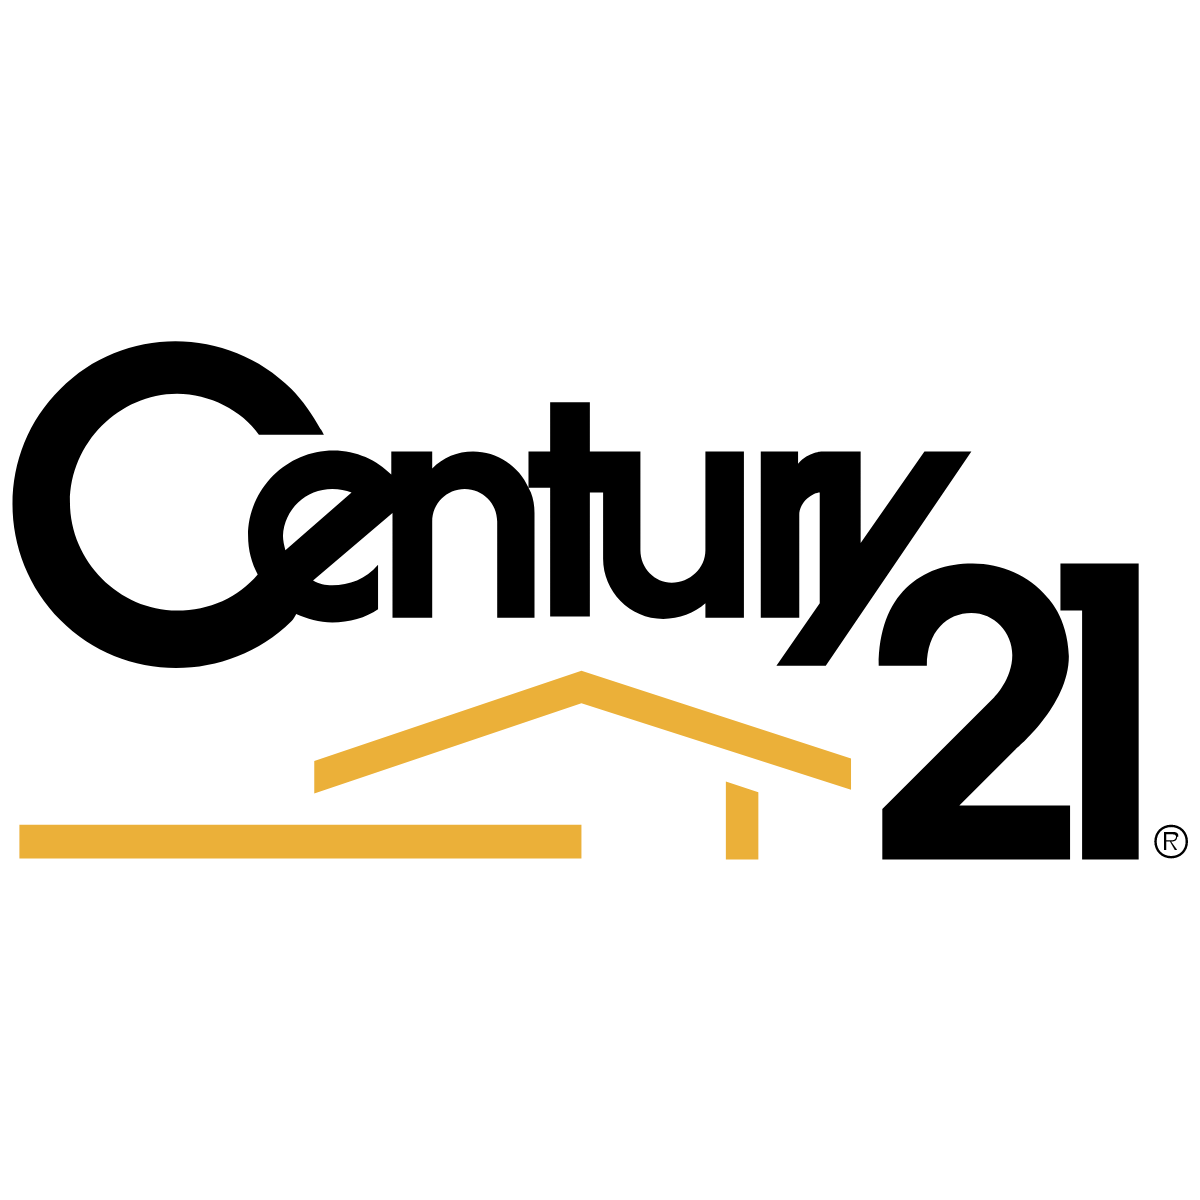 Century 21 Real Estate launches new recruiting campaign